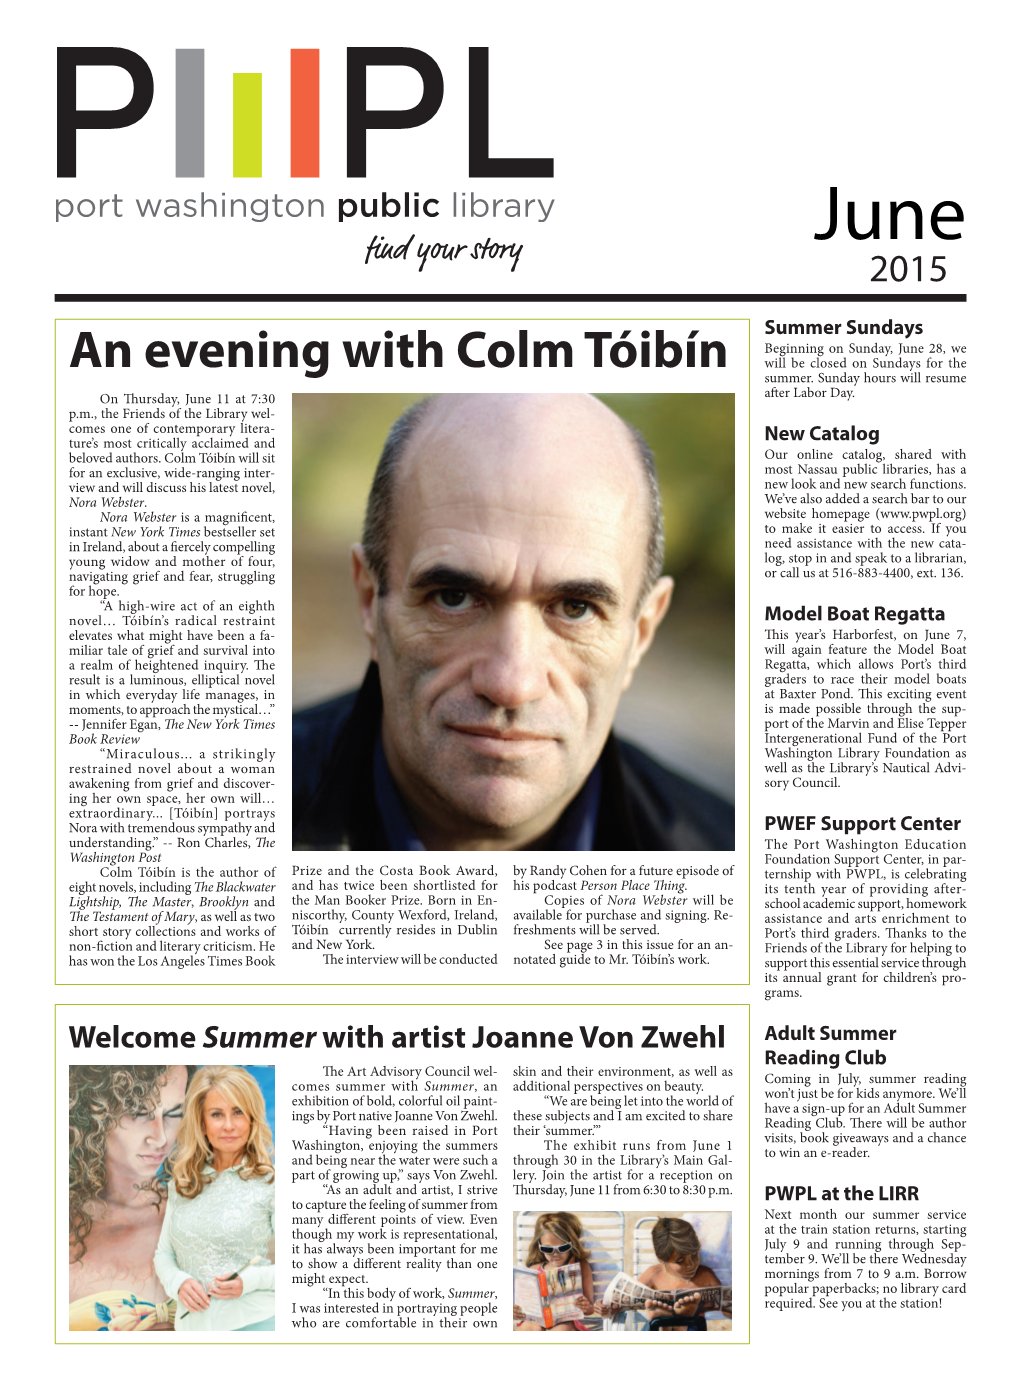 An Evening with Colm Tóibín Will Be Closed on Sundays for the Summer